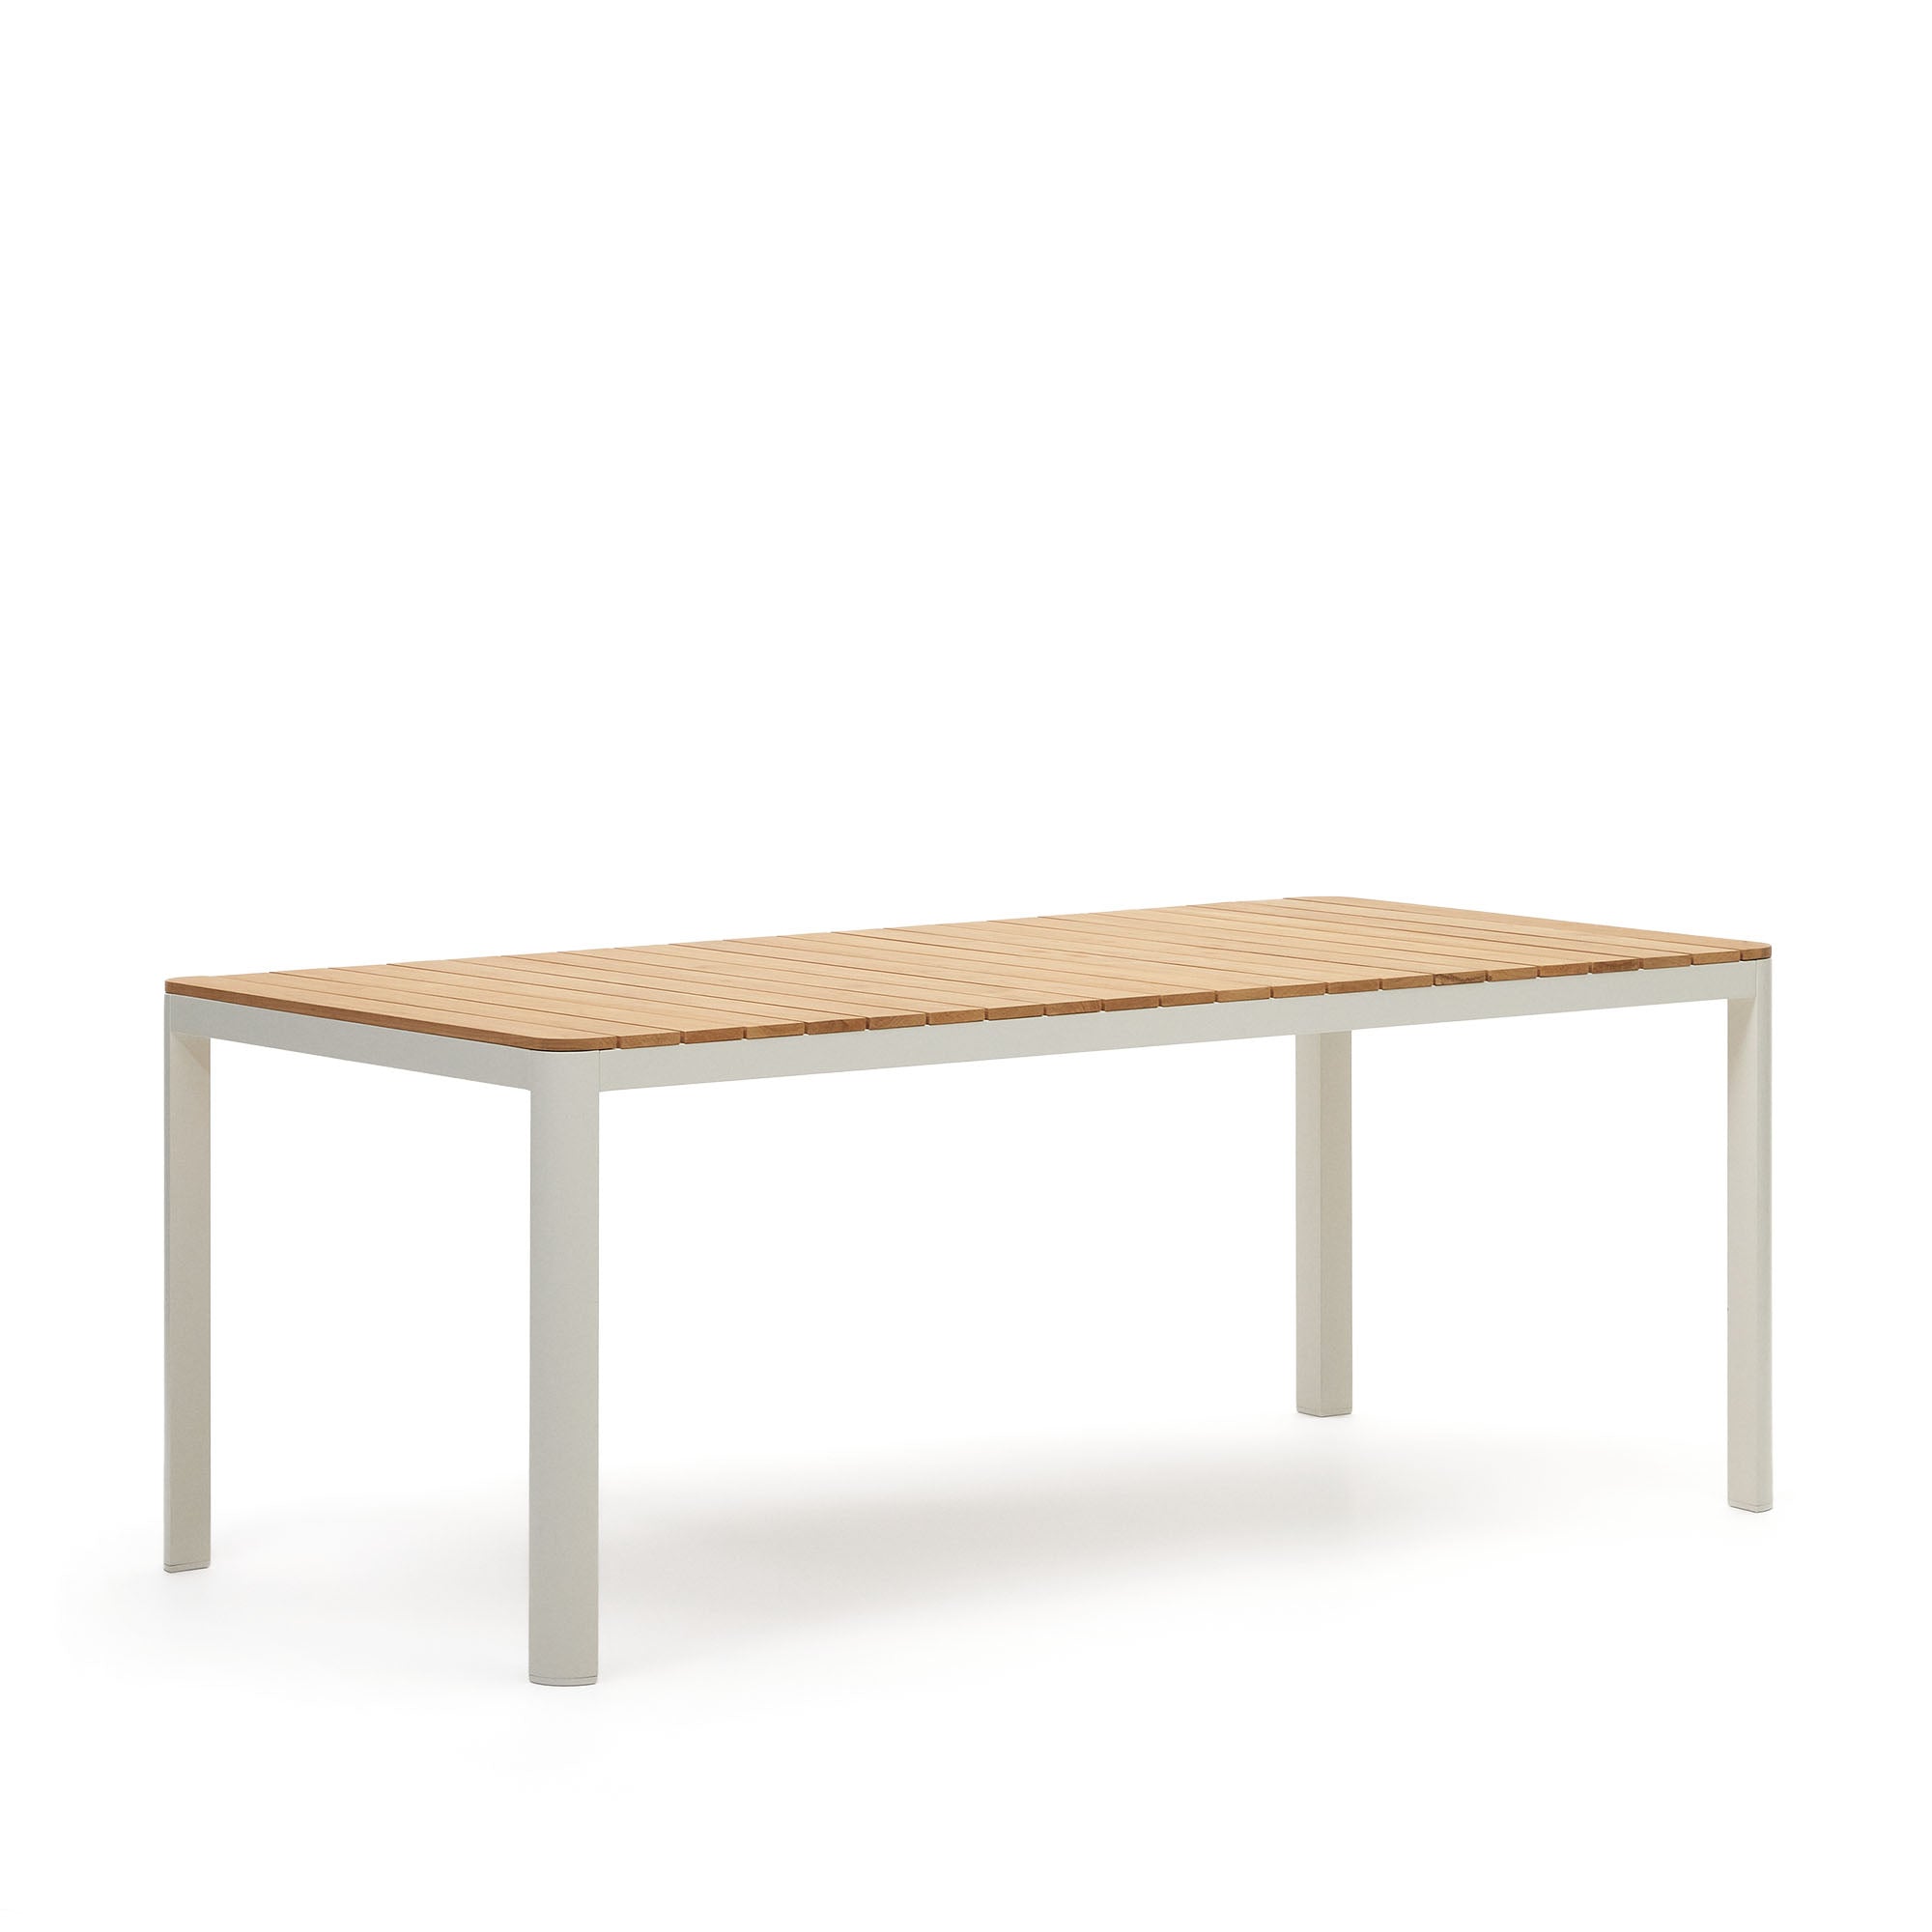 Bona aluminium and solid teak table, 100% outdoor suitable with white finish, 200 x 100 cm